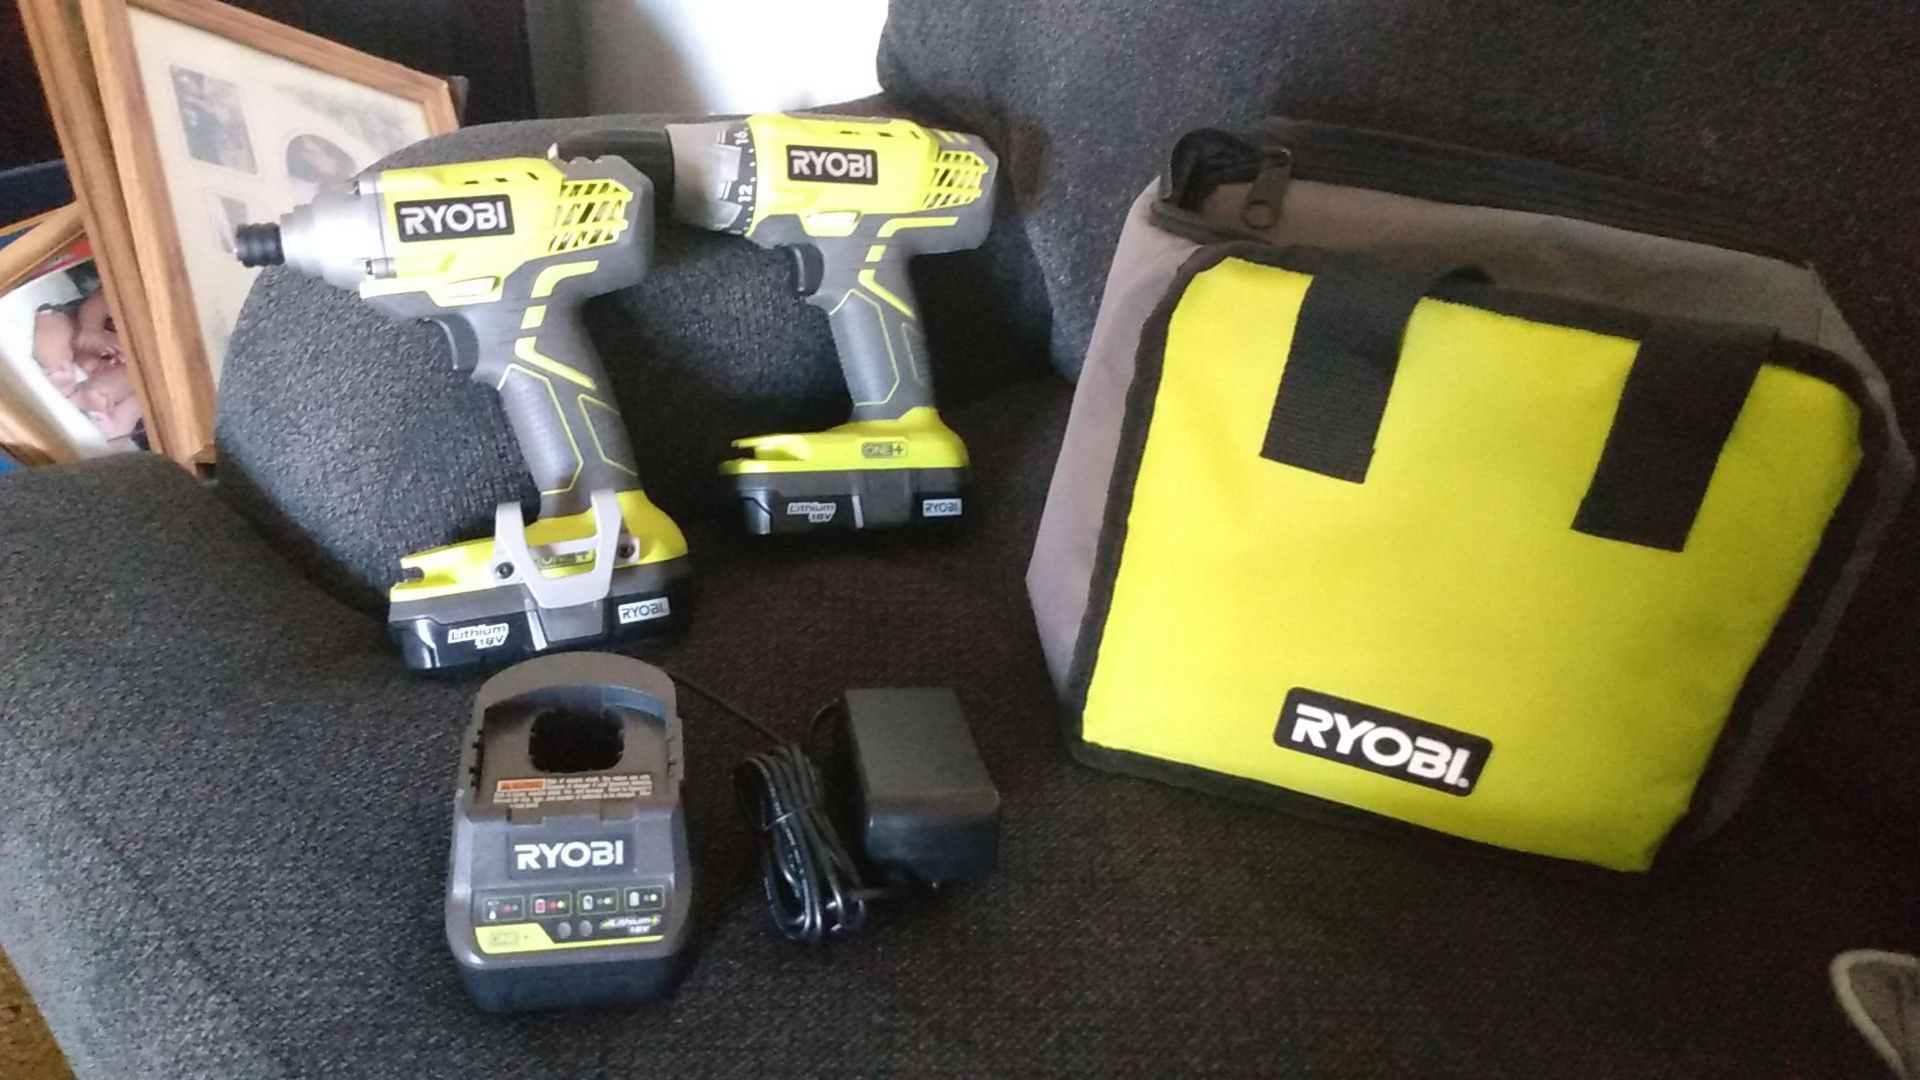 New Ryobi lithium 18volt drill and impact. With 2batteries charger and bag.